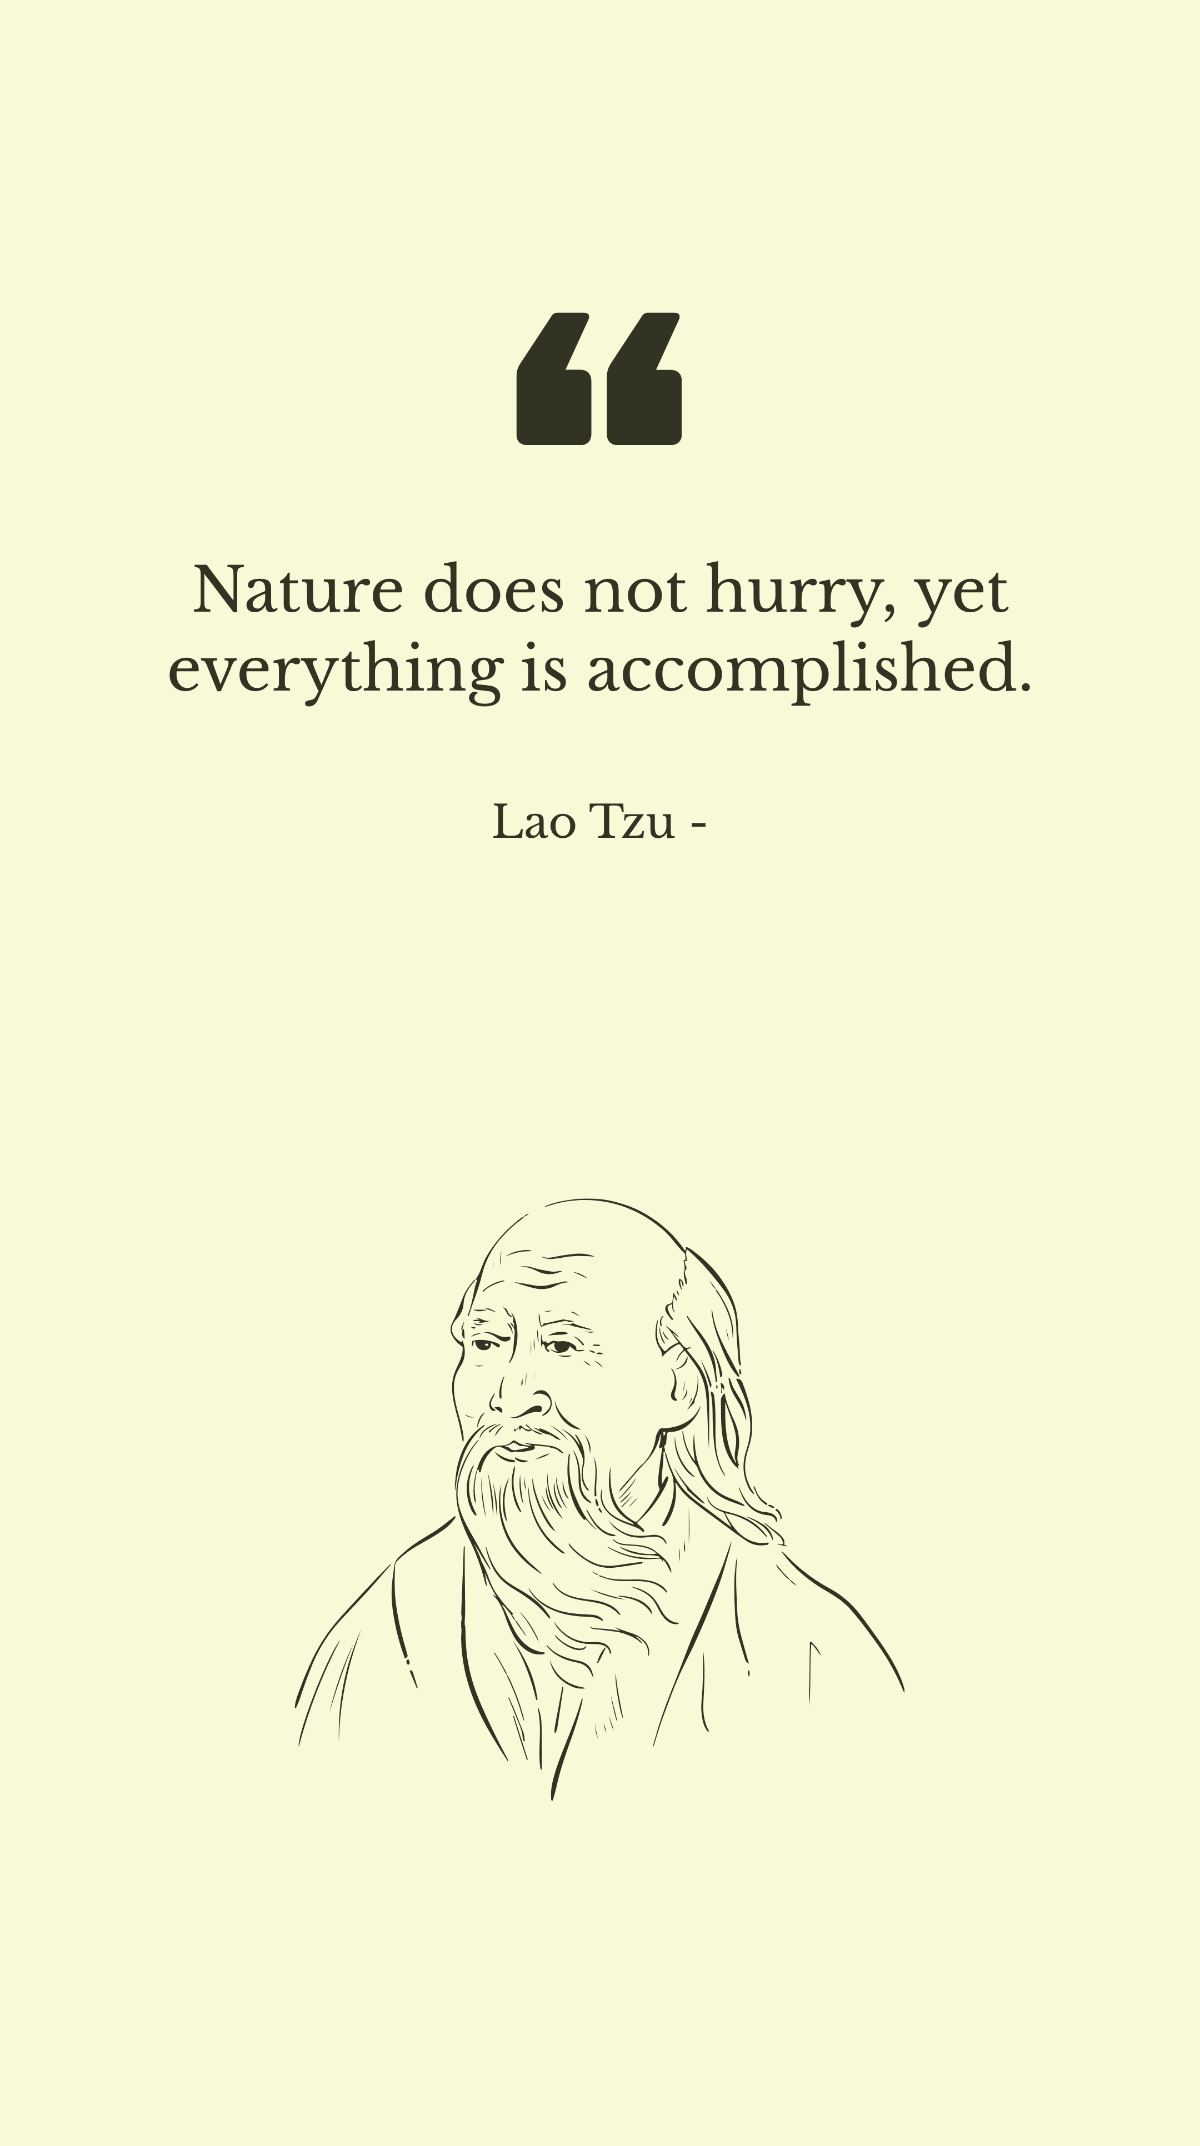 Lao Tzu - Nature does not hurry, yet everything is accomplished. Template